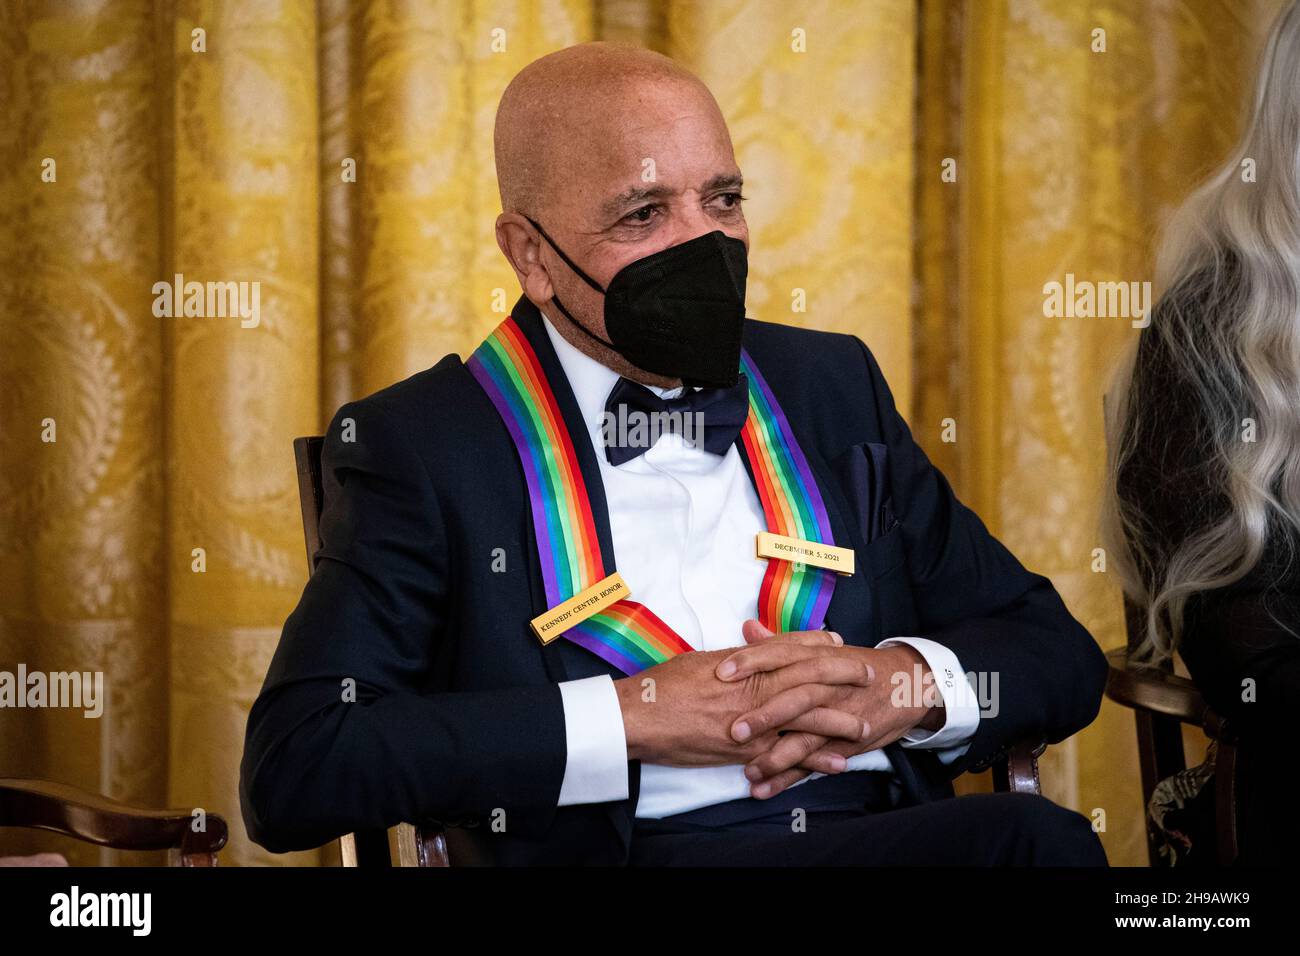 Washington, DC, U.S., on Sunday, Dec. 5, 2021. Berry Gordy, Motown founder, listens as U.S. President Joe Biden, not pictured, speaks during the Kennedy Center Honorees Reception in the East Room of the White House in Washington, DC, U.S., on Sunday, Dec. 5, 2021. The John F. Kennedy Center for the Performing Arts 44th Honorees for lifetime artistic achievements include operatic bass-baritone Justino Diaz, Motown founder Berry Gordy, Saturday Night Live creator Lorne Michaels, actress Bette Midler, and singer-songwriter Joni Mitchell. Credit: Al Drago/Pool via CNP /MediaPunch Stock Photo